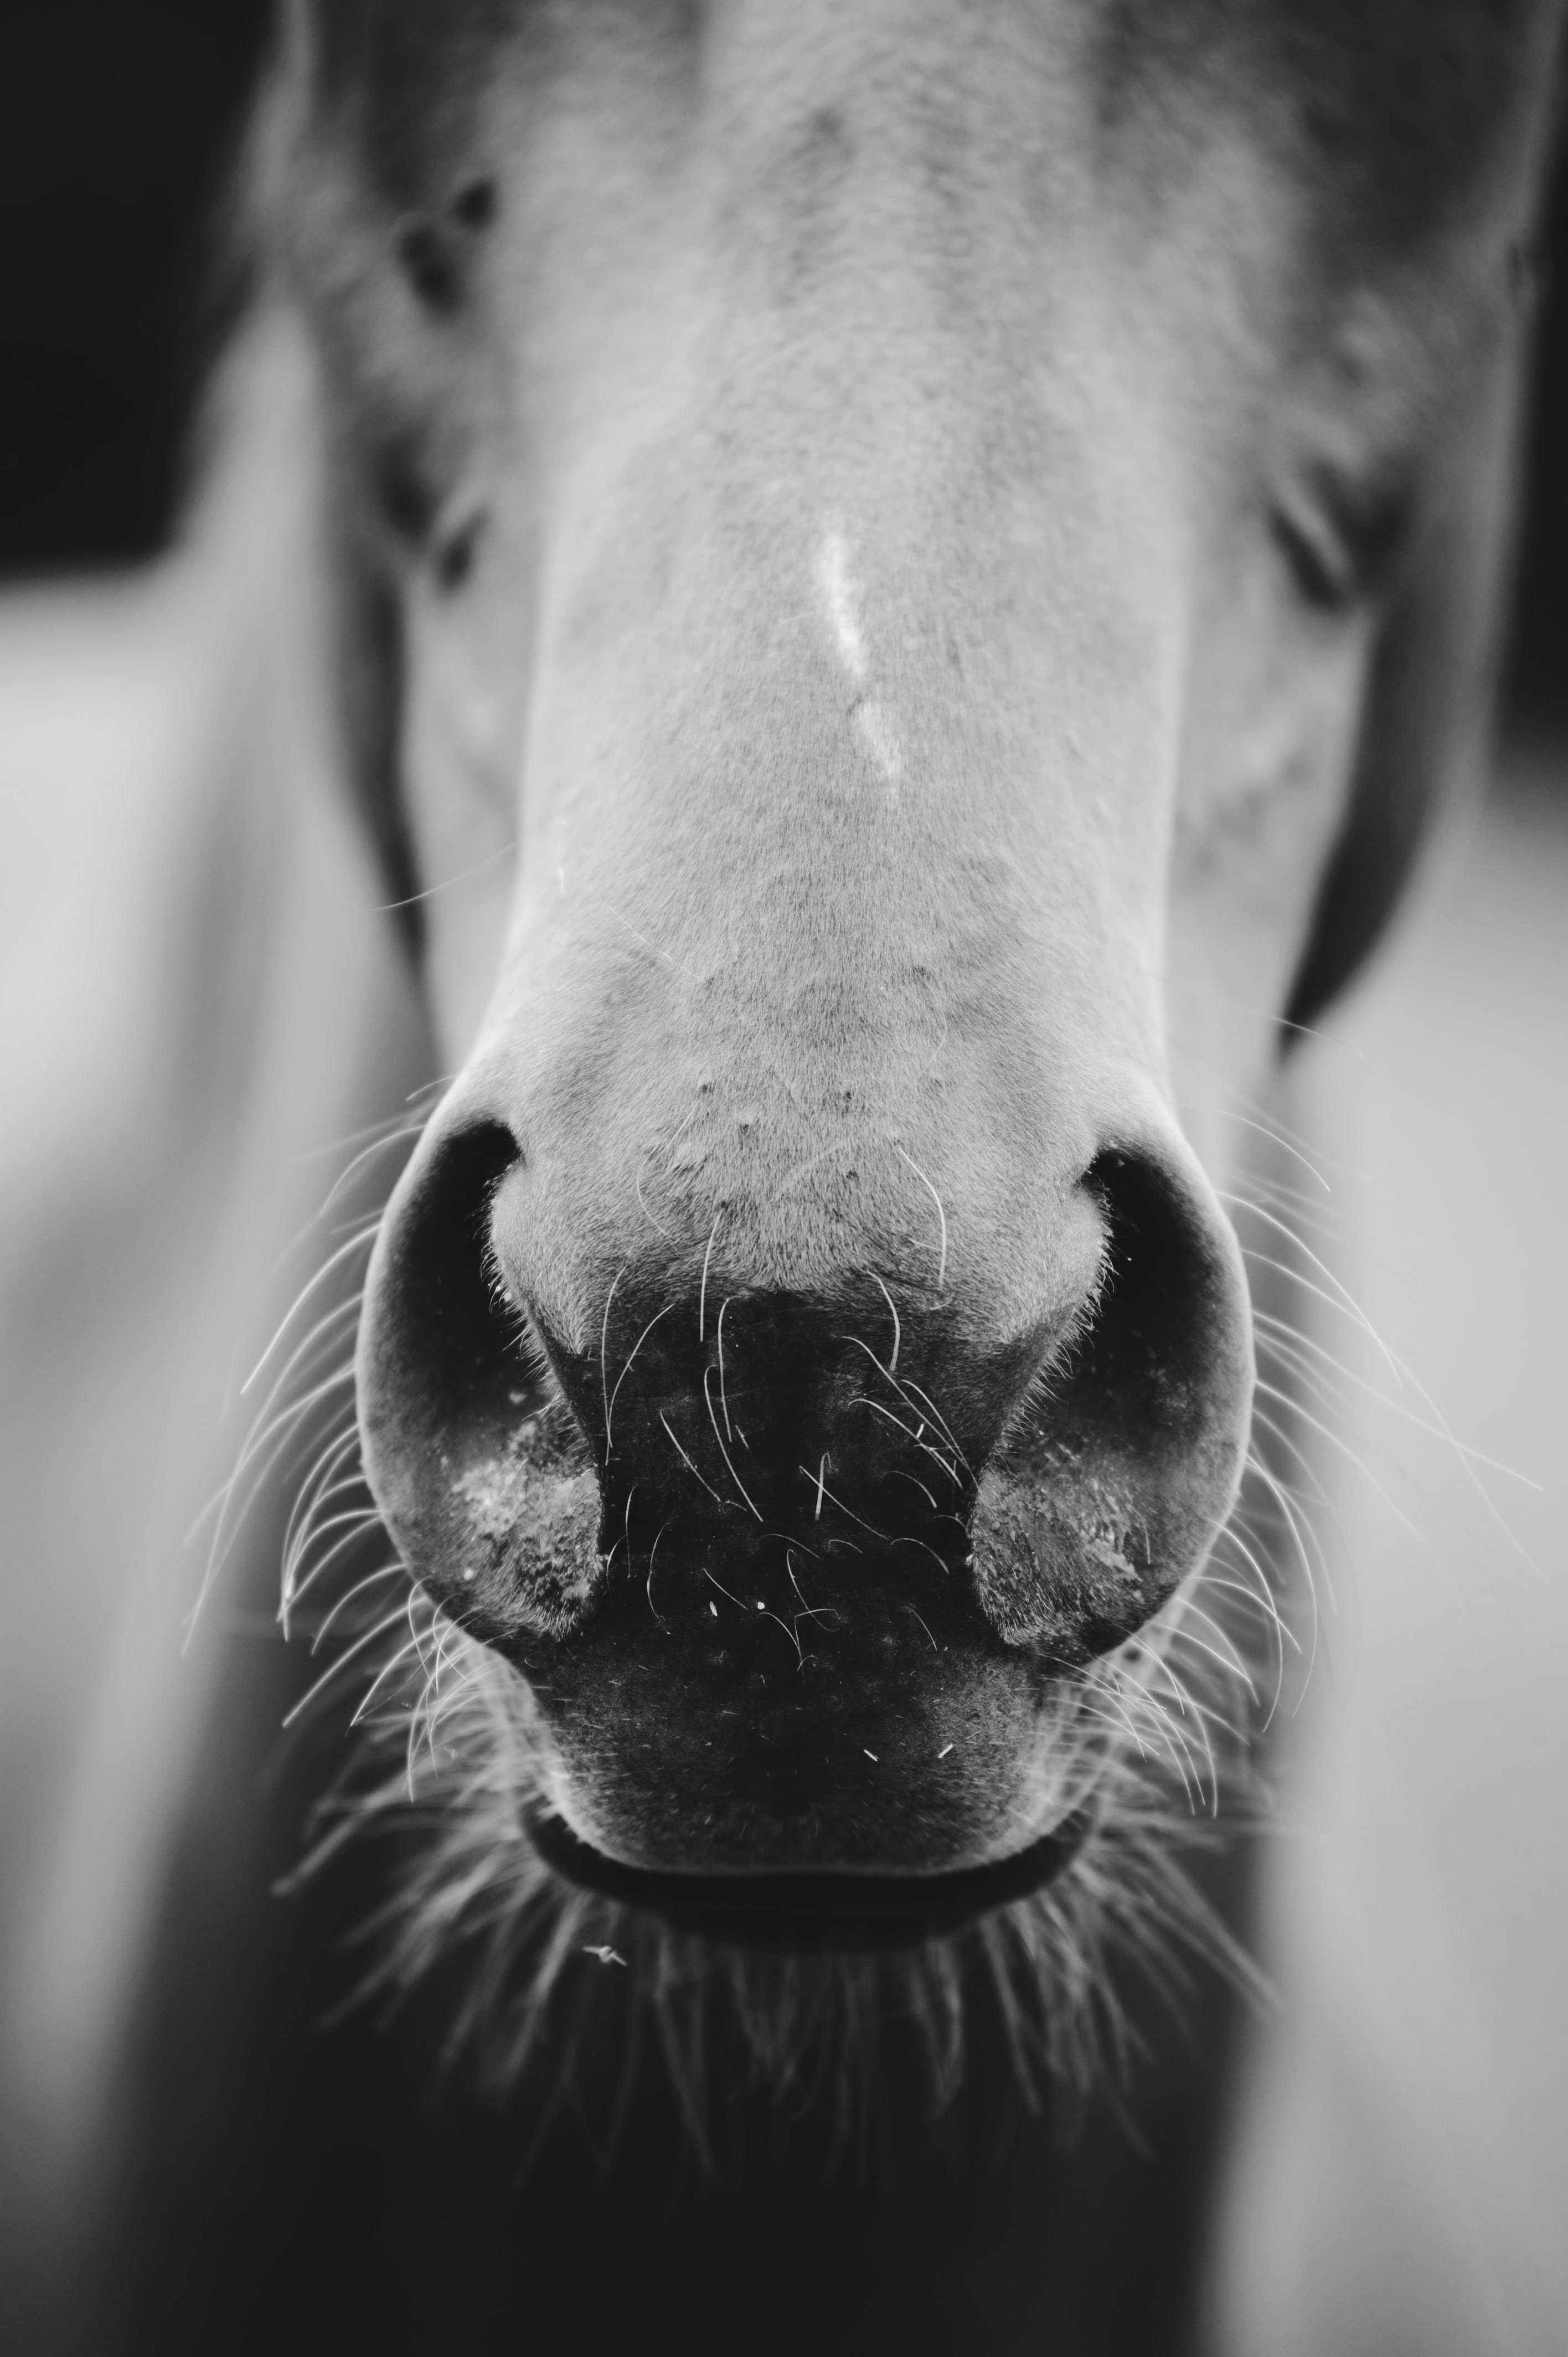 German federation makes EHV-1 vaccination obligatory for competition horses